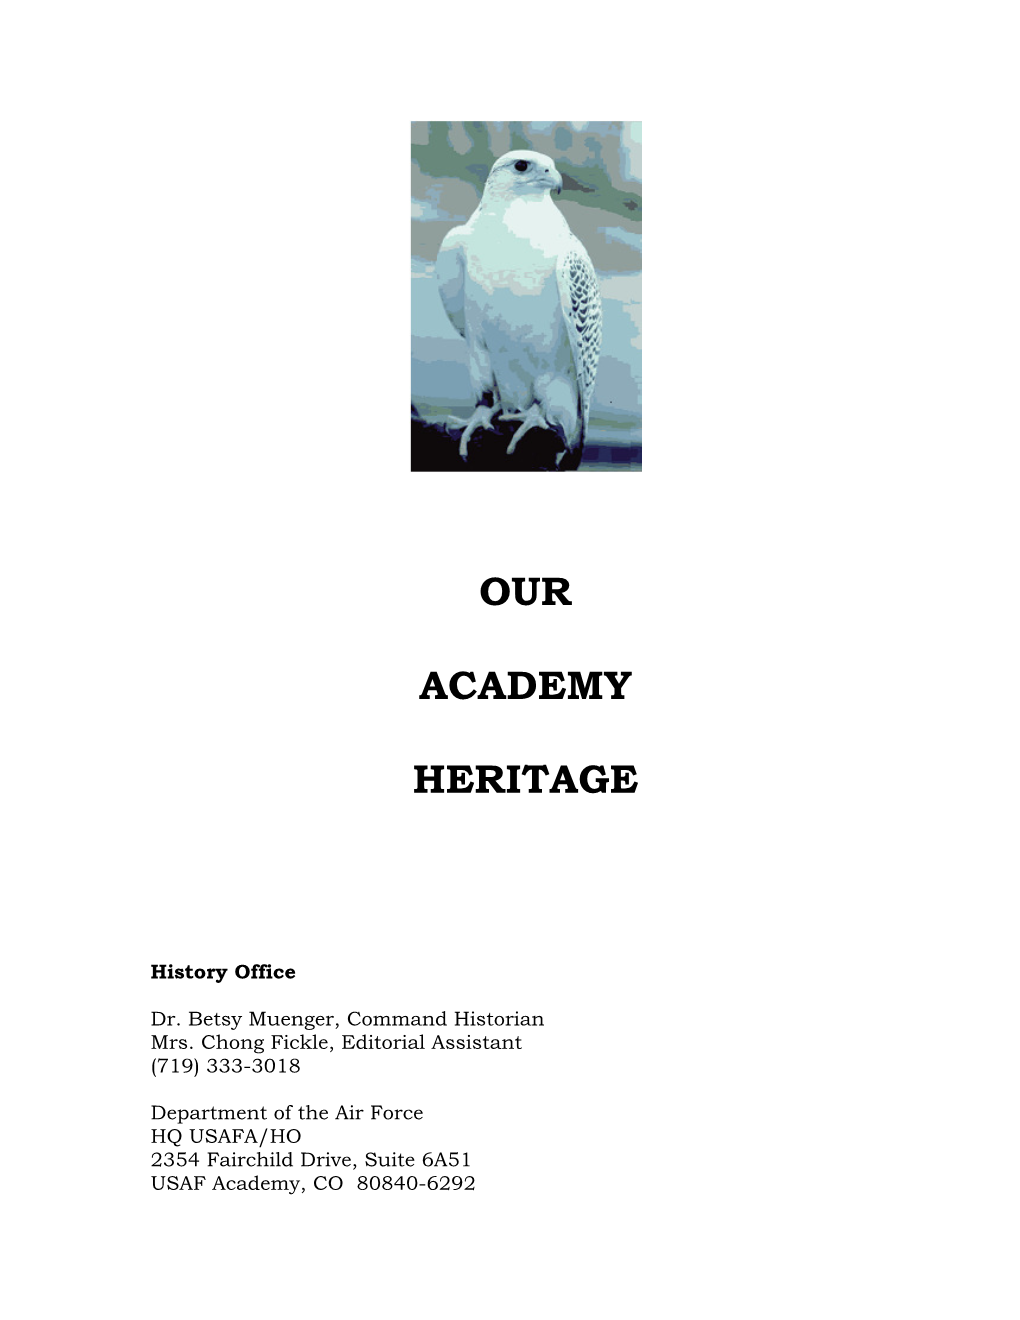 Our Academy Heritage